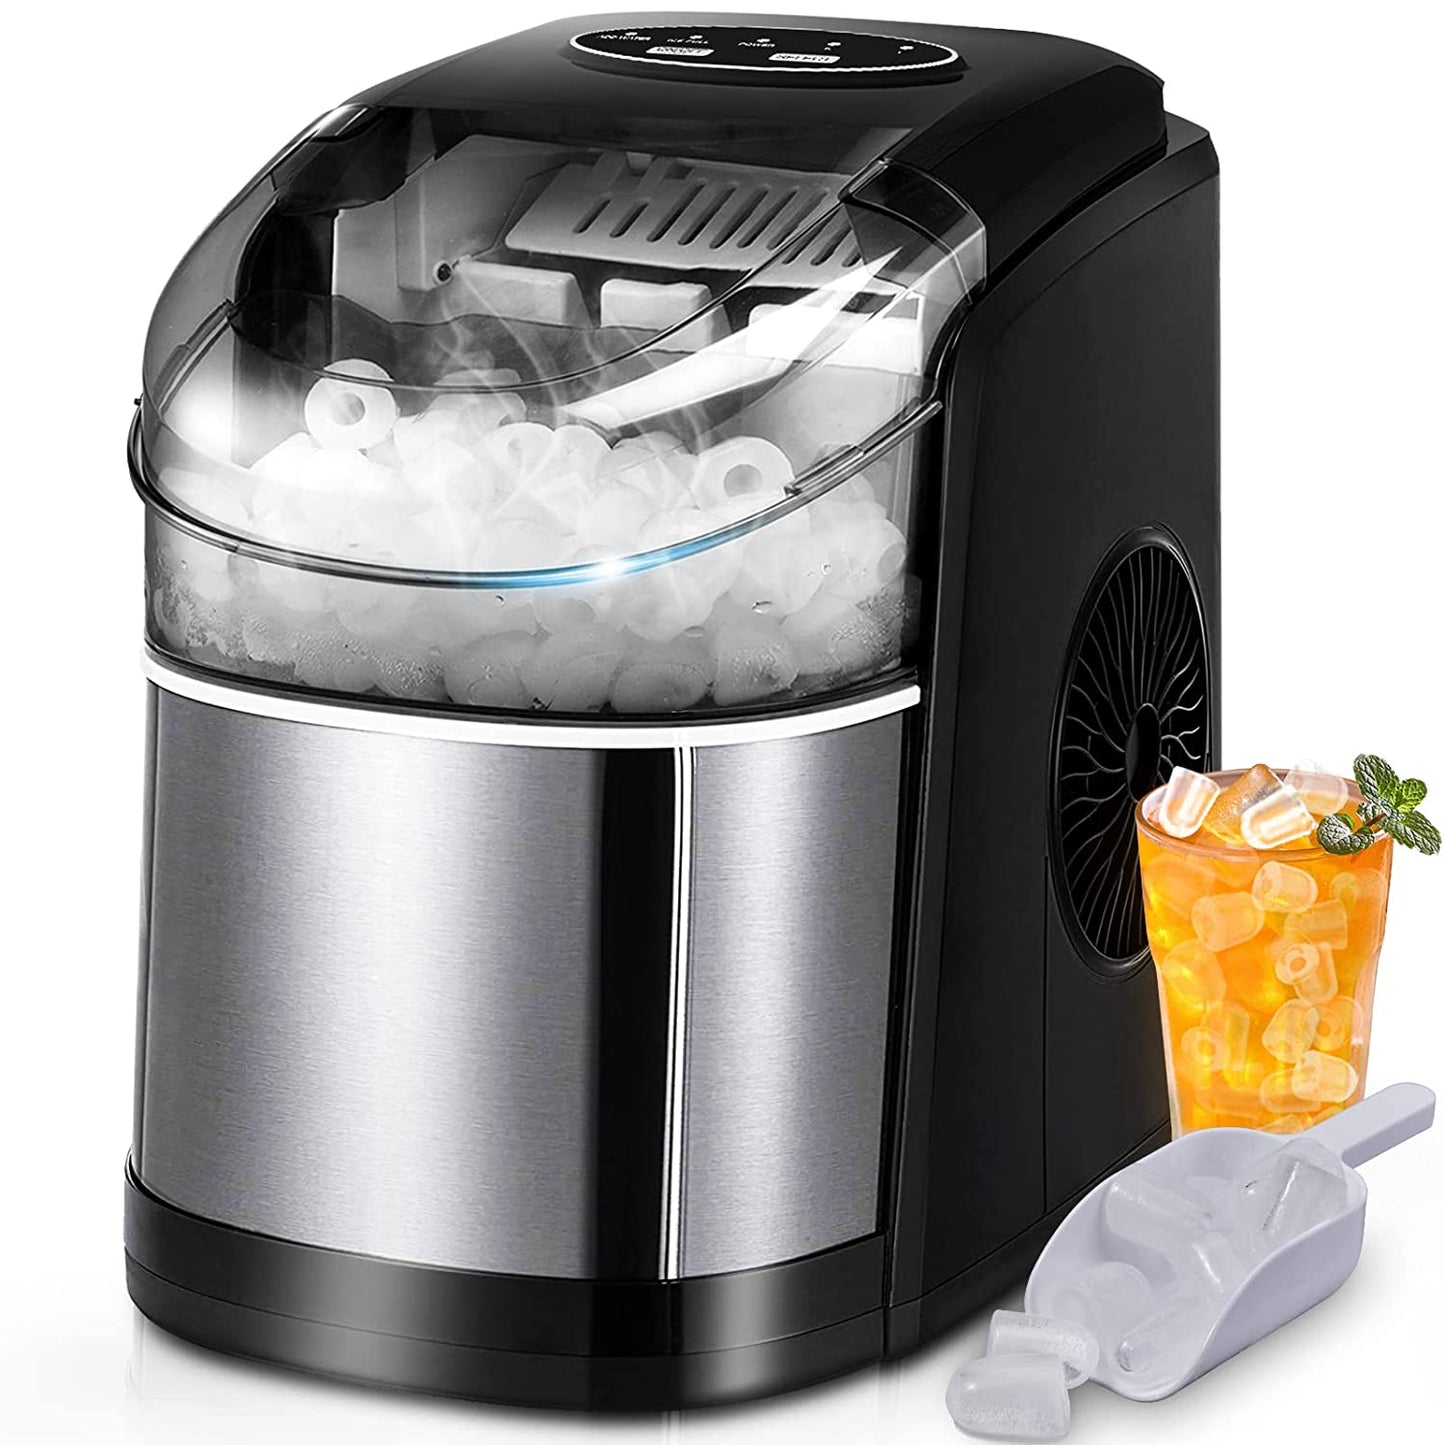 Countertop Ice Maker, Ice Maker Machine for Countertop 9 Ice Ready in 6 Mins, 26Lbs/24H, Self-Cleaning Function, Portable Ice Maker with Ice Scoop & Basket for Home/Party/Camping (Black)